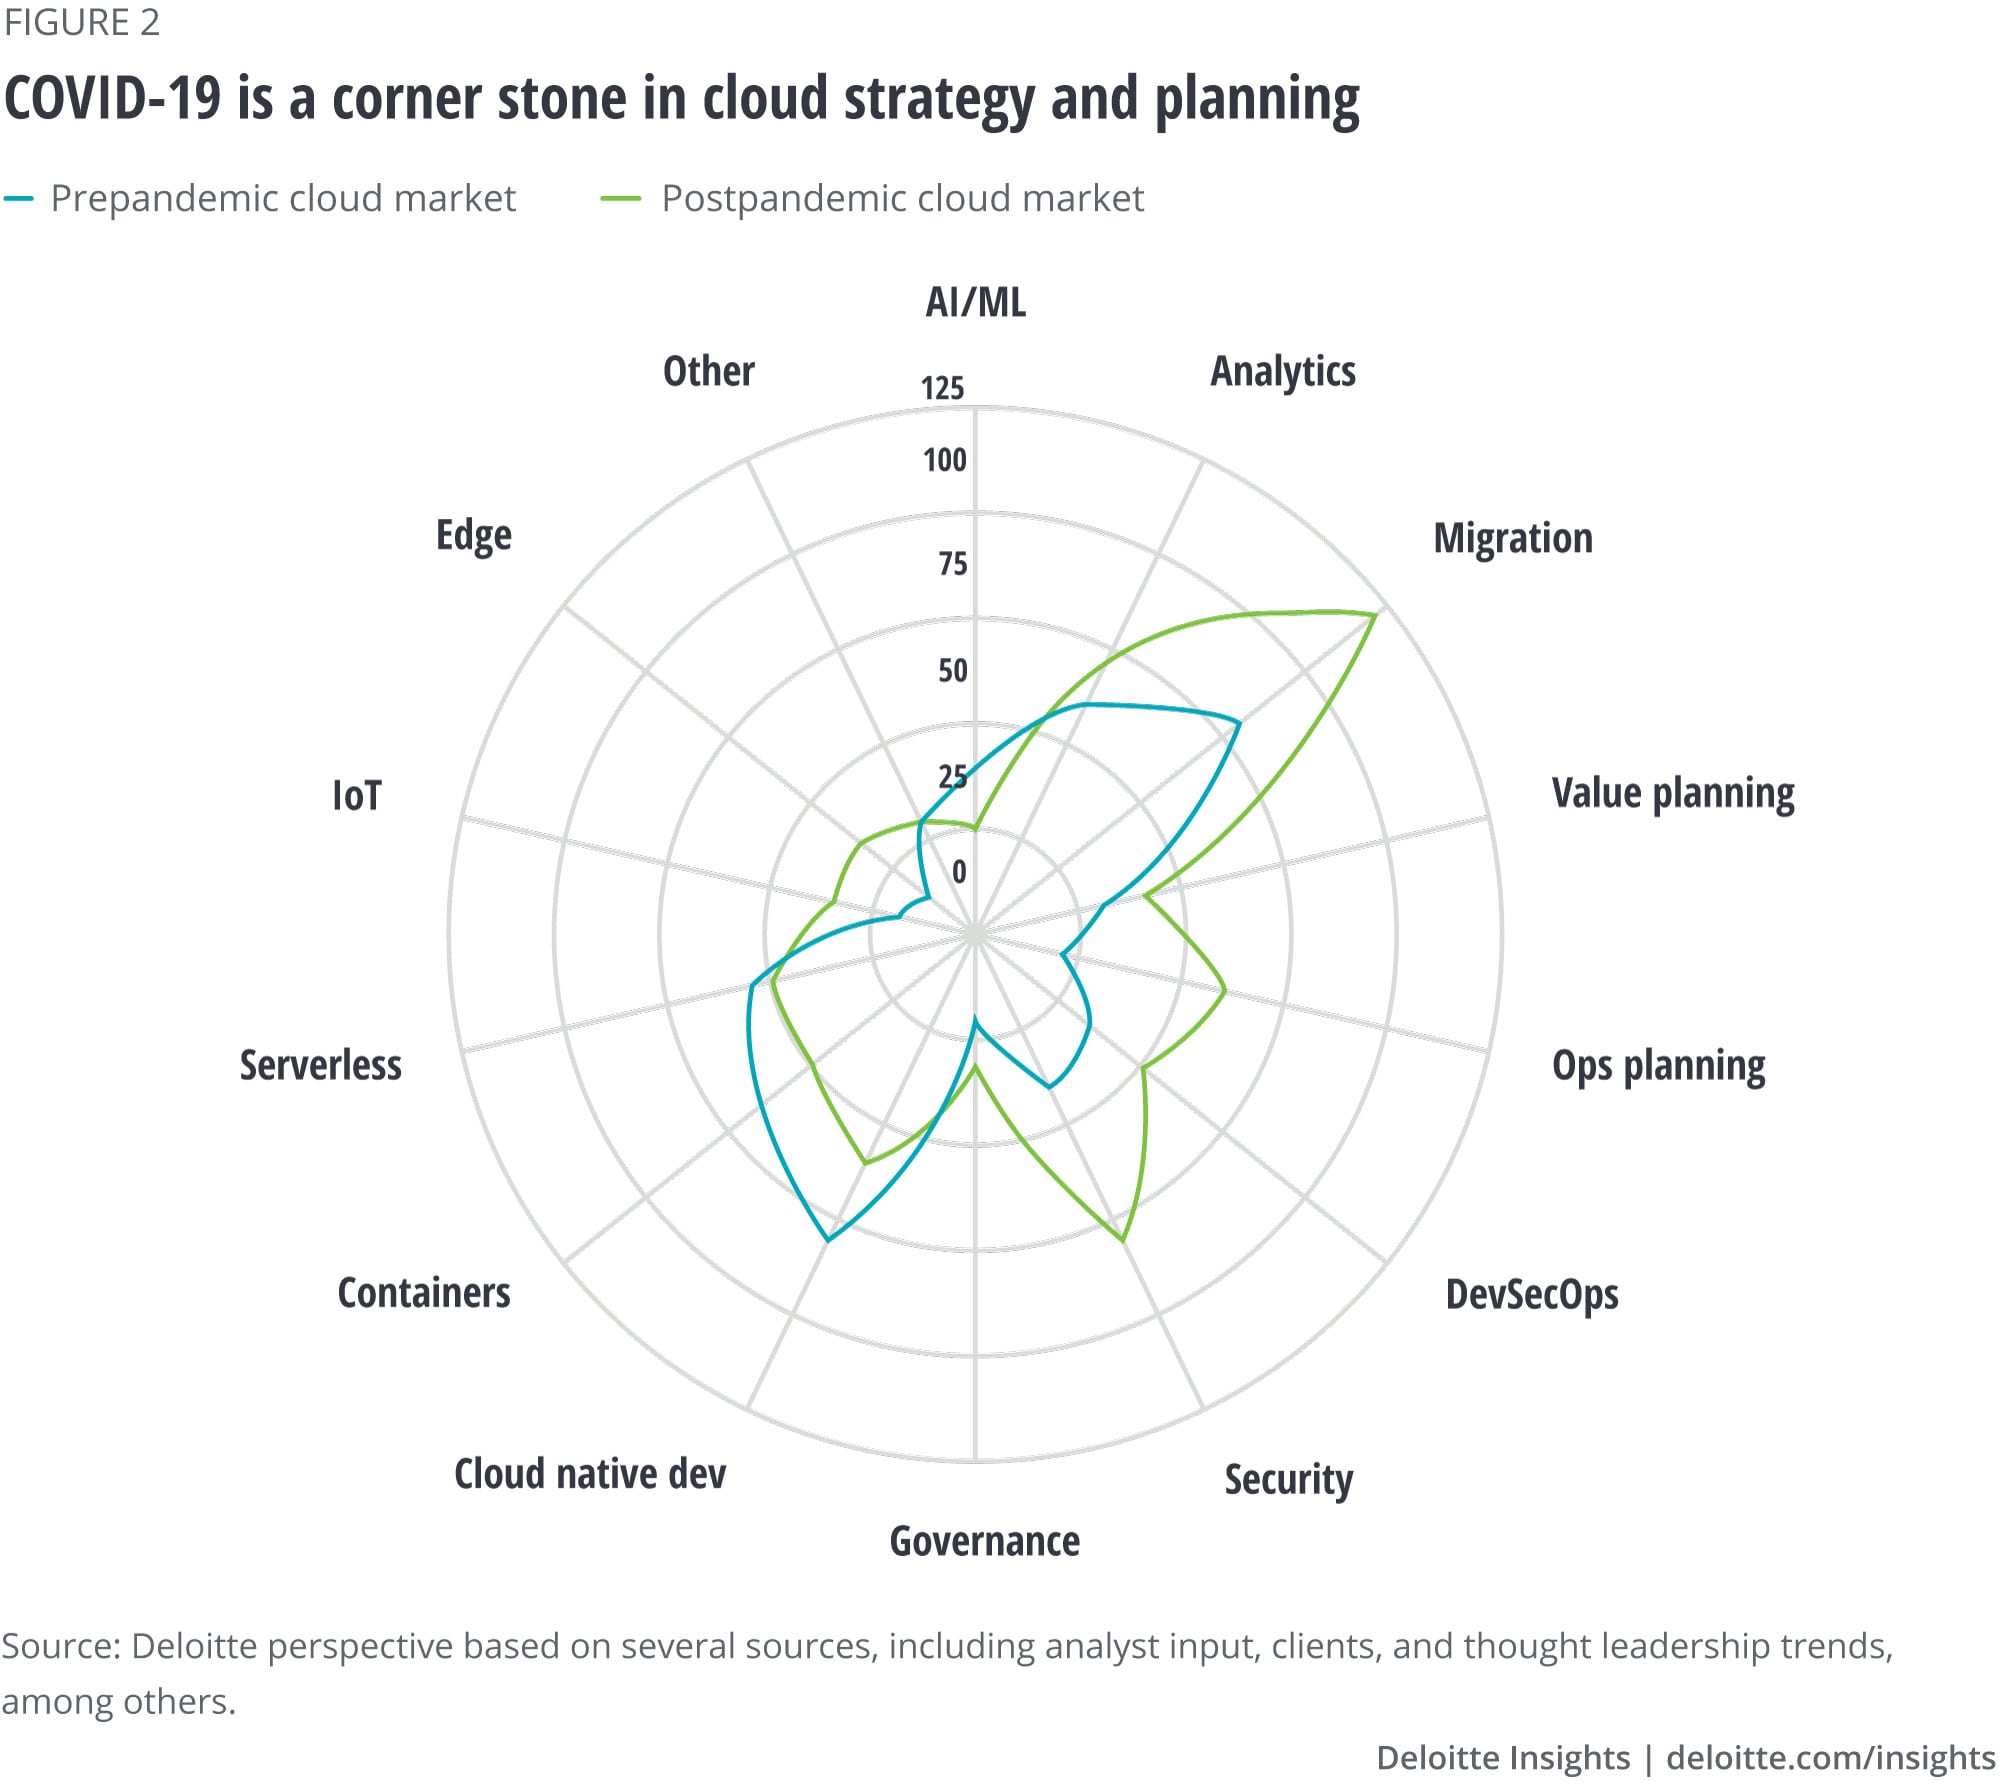 COVID-19 is a cornerstone in cloud strategy and planning